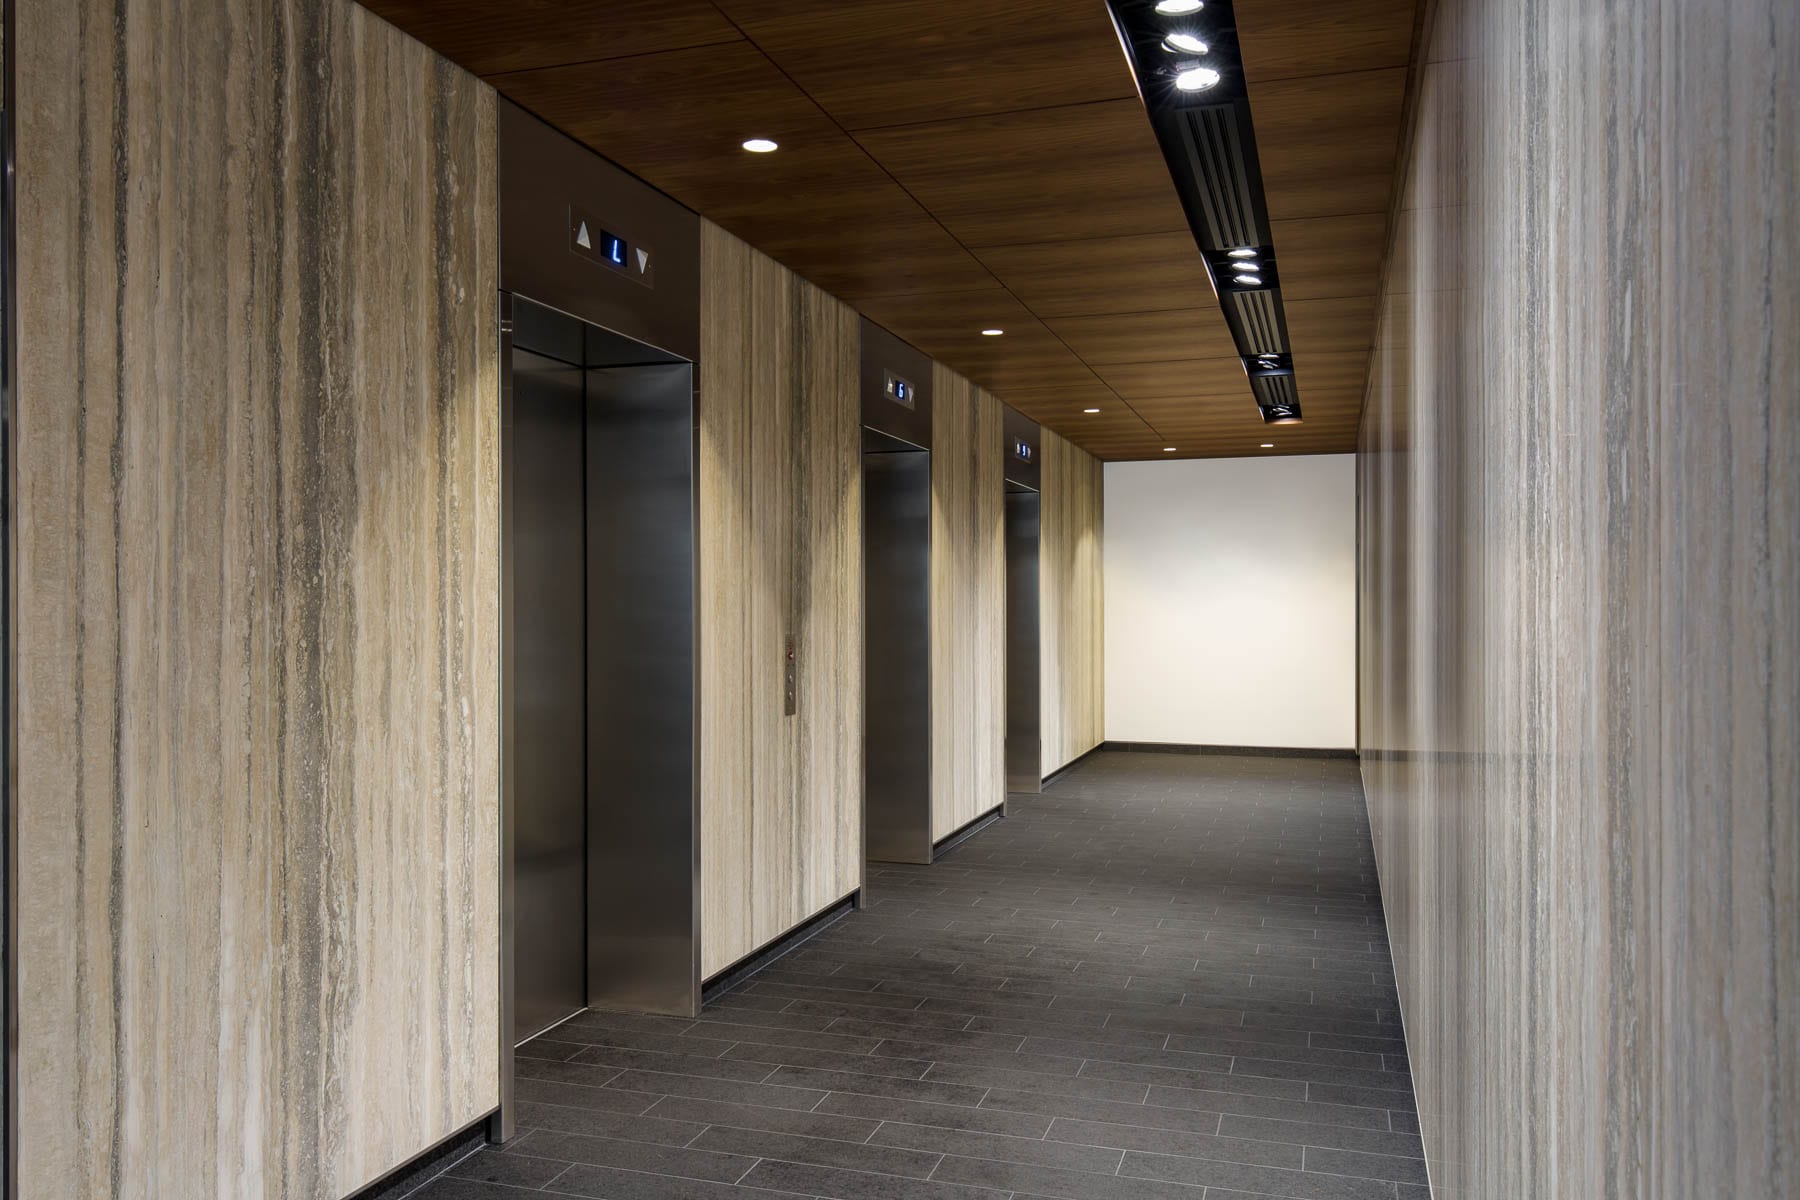 Renovated lobby at 475 West Georgia with new finishes, porcelain floor tiles, wood veneer bulkhead with recessed lighting